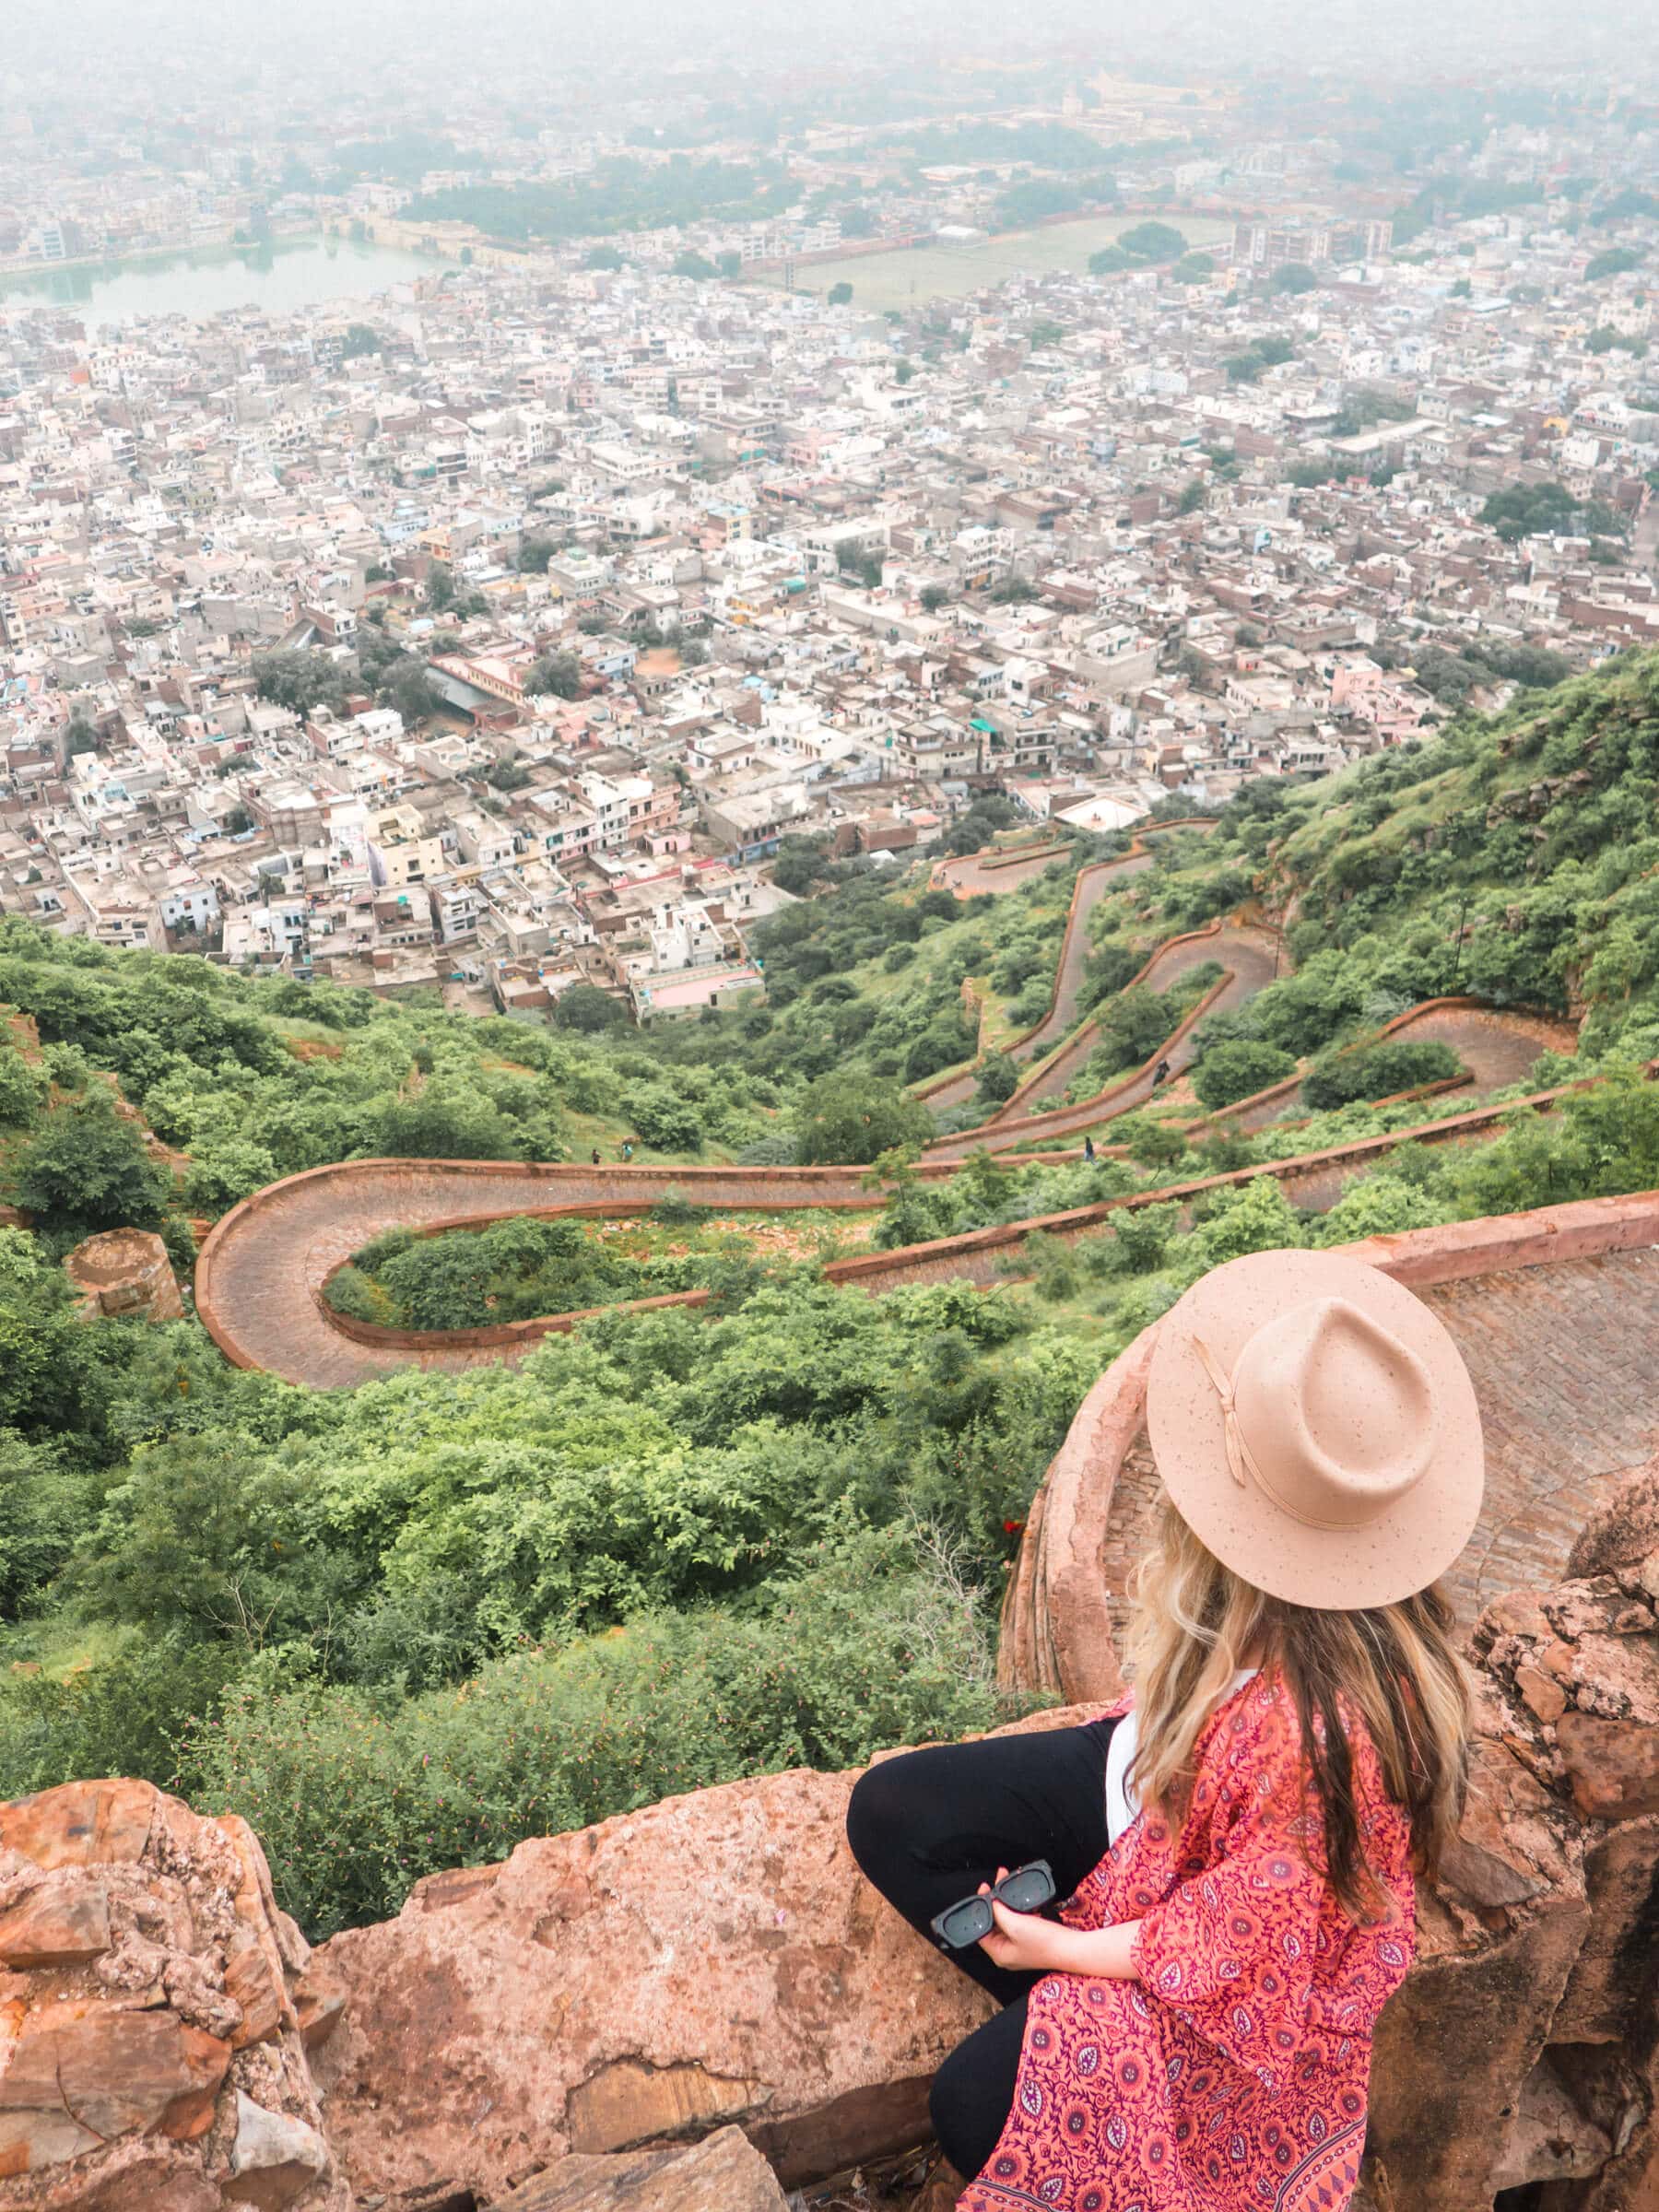 A guide to Nahargarh Fort - The best sunset view point in Jaipur, India. How to get the best sunset photos at #nahargarhfort #jaipur #india